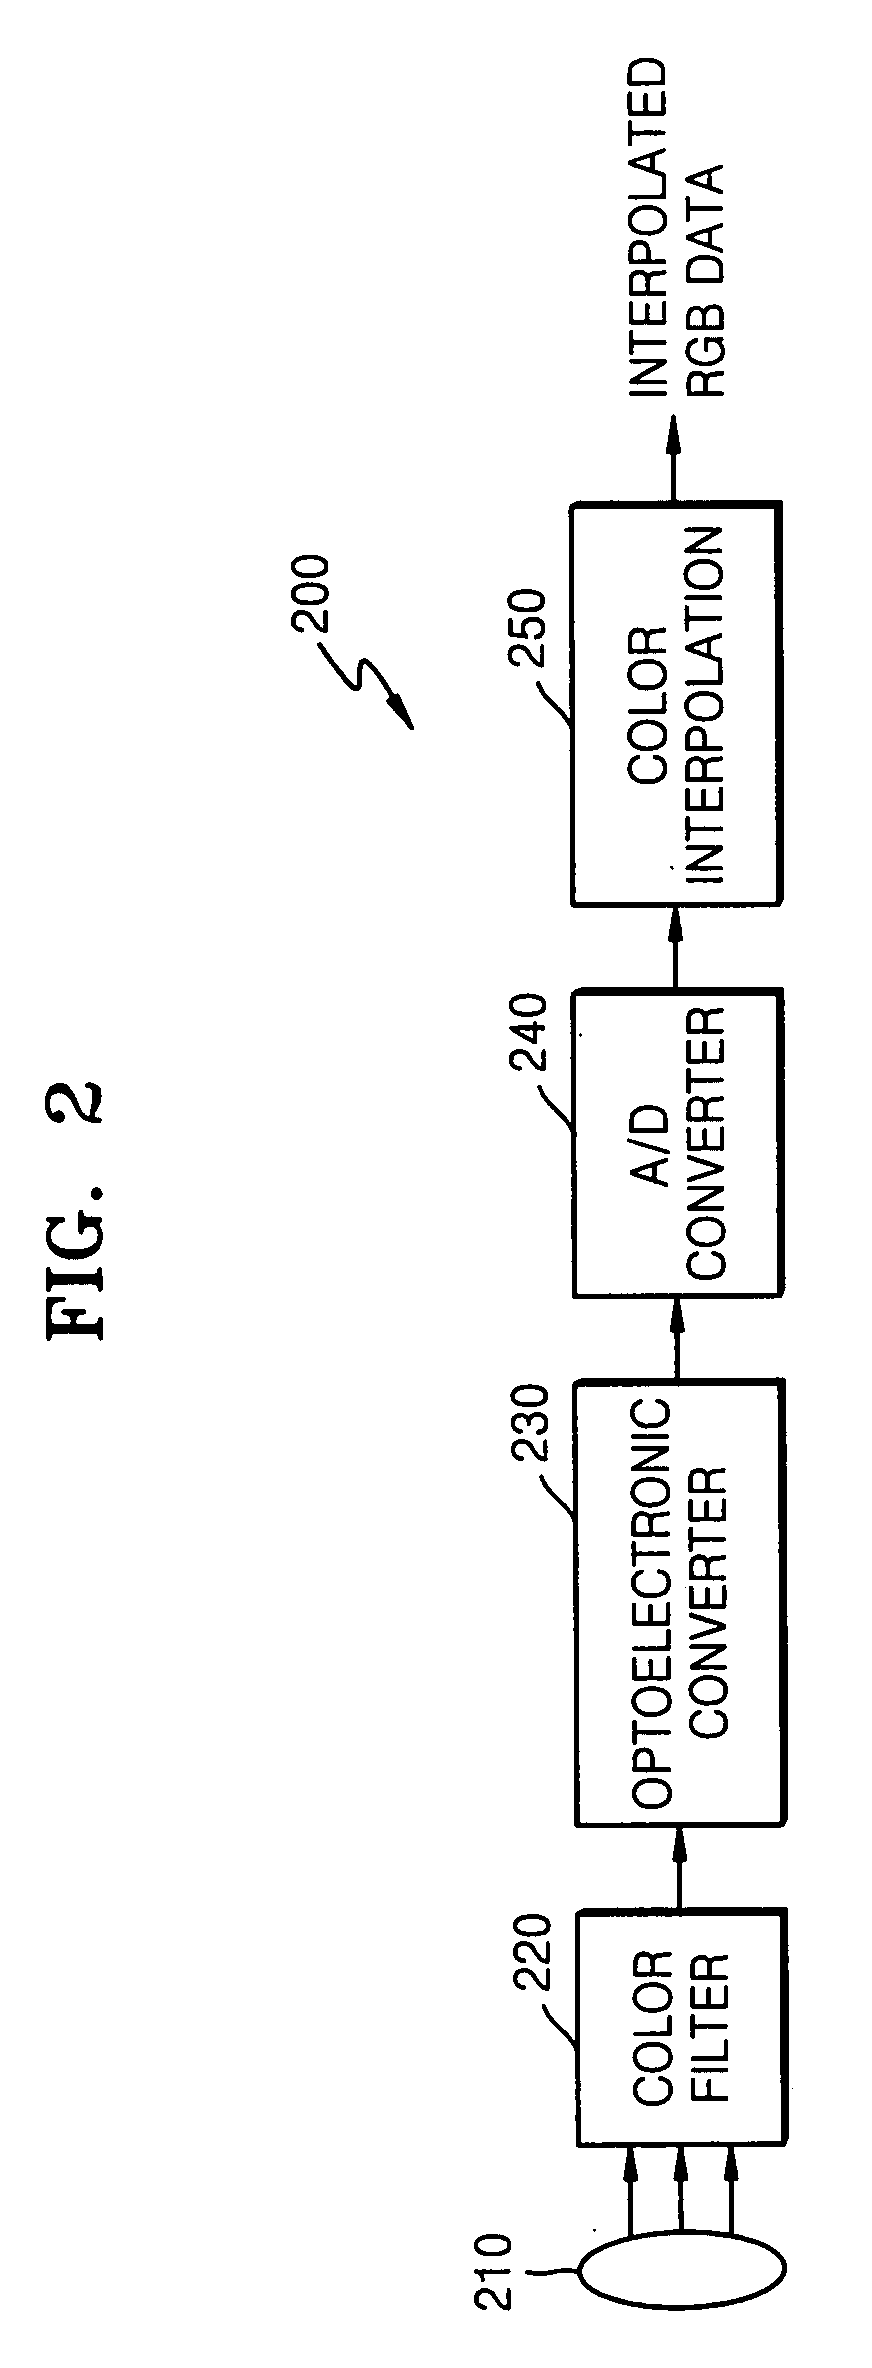 Method and apparatus for interpolating color value